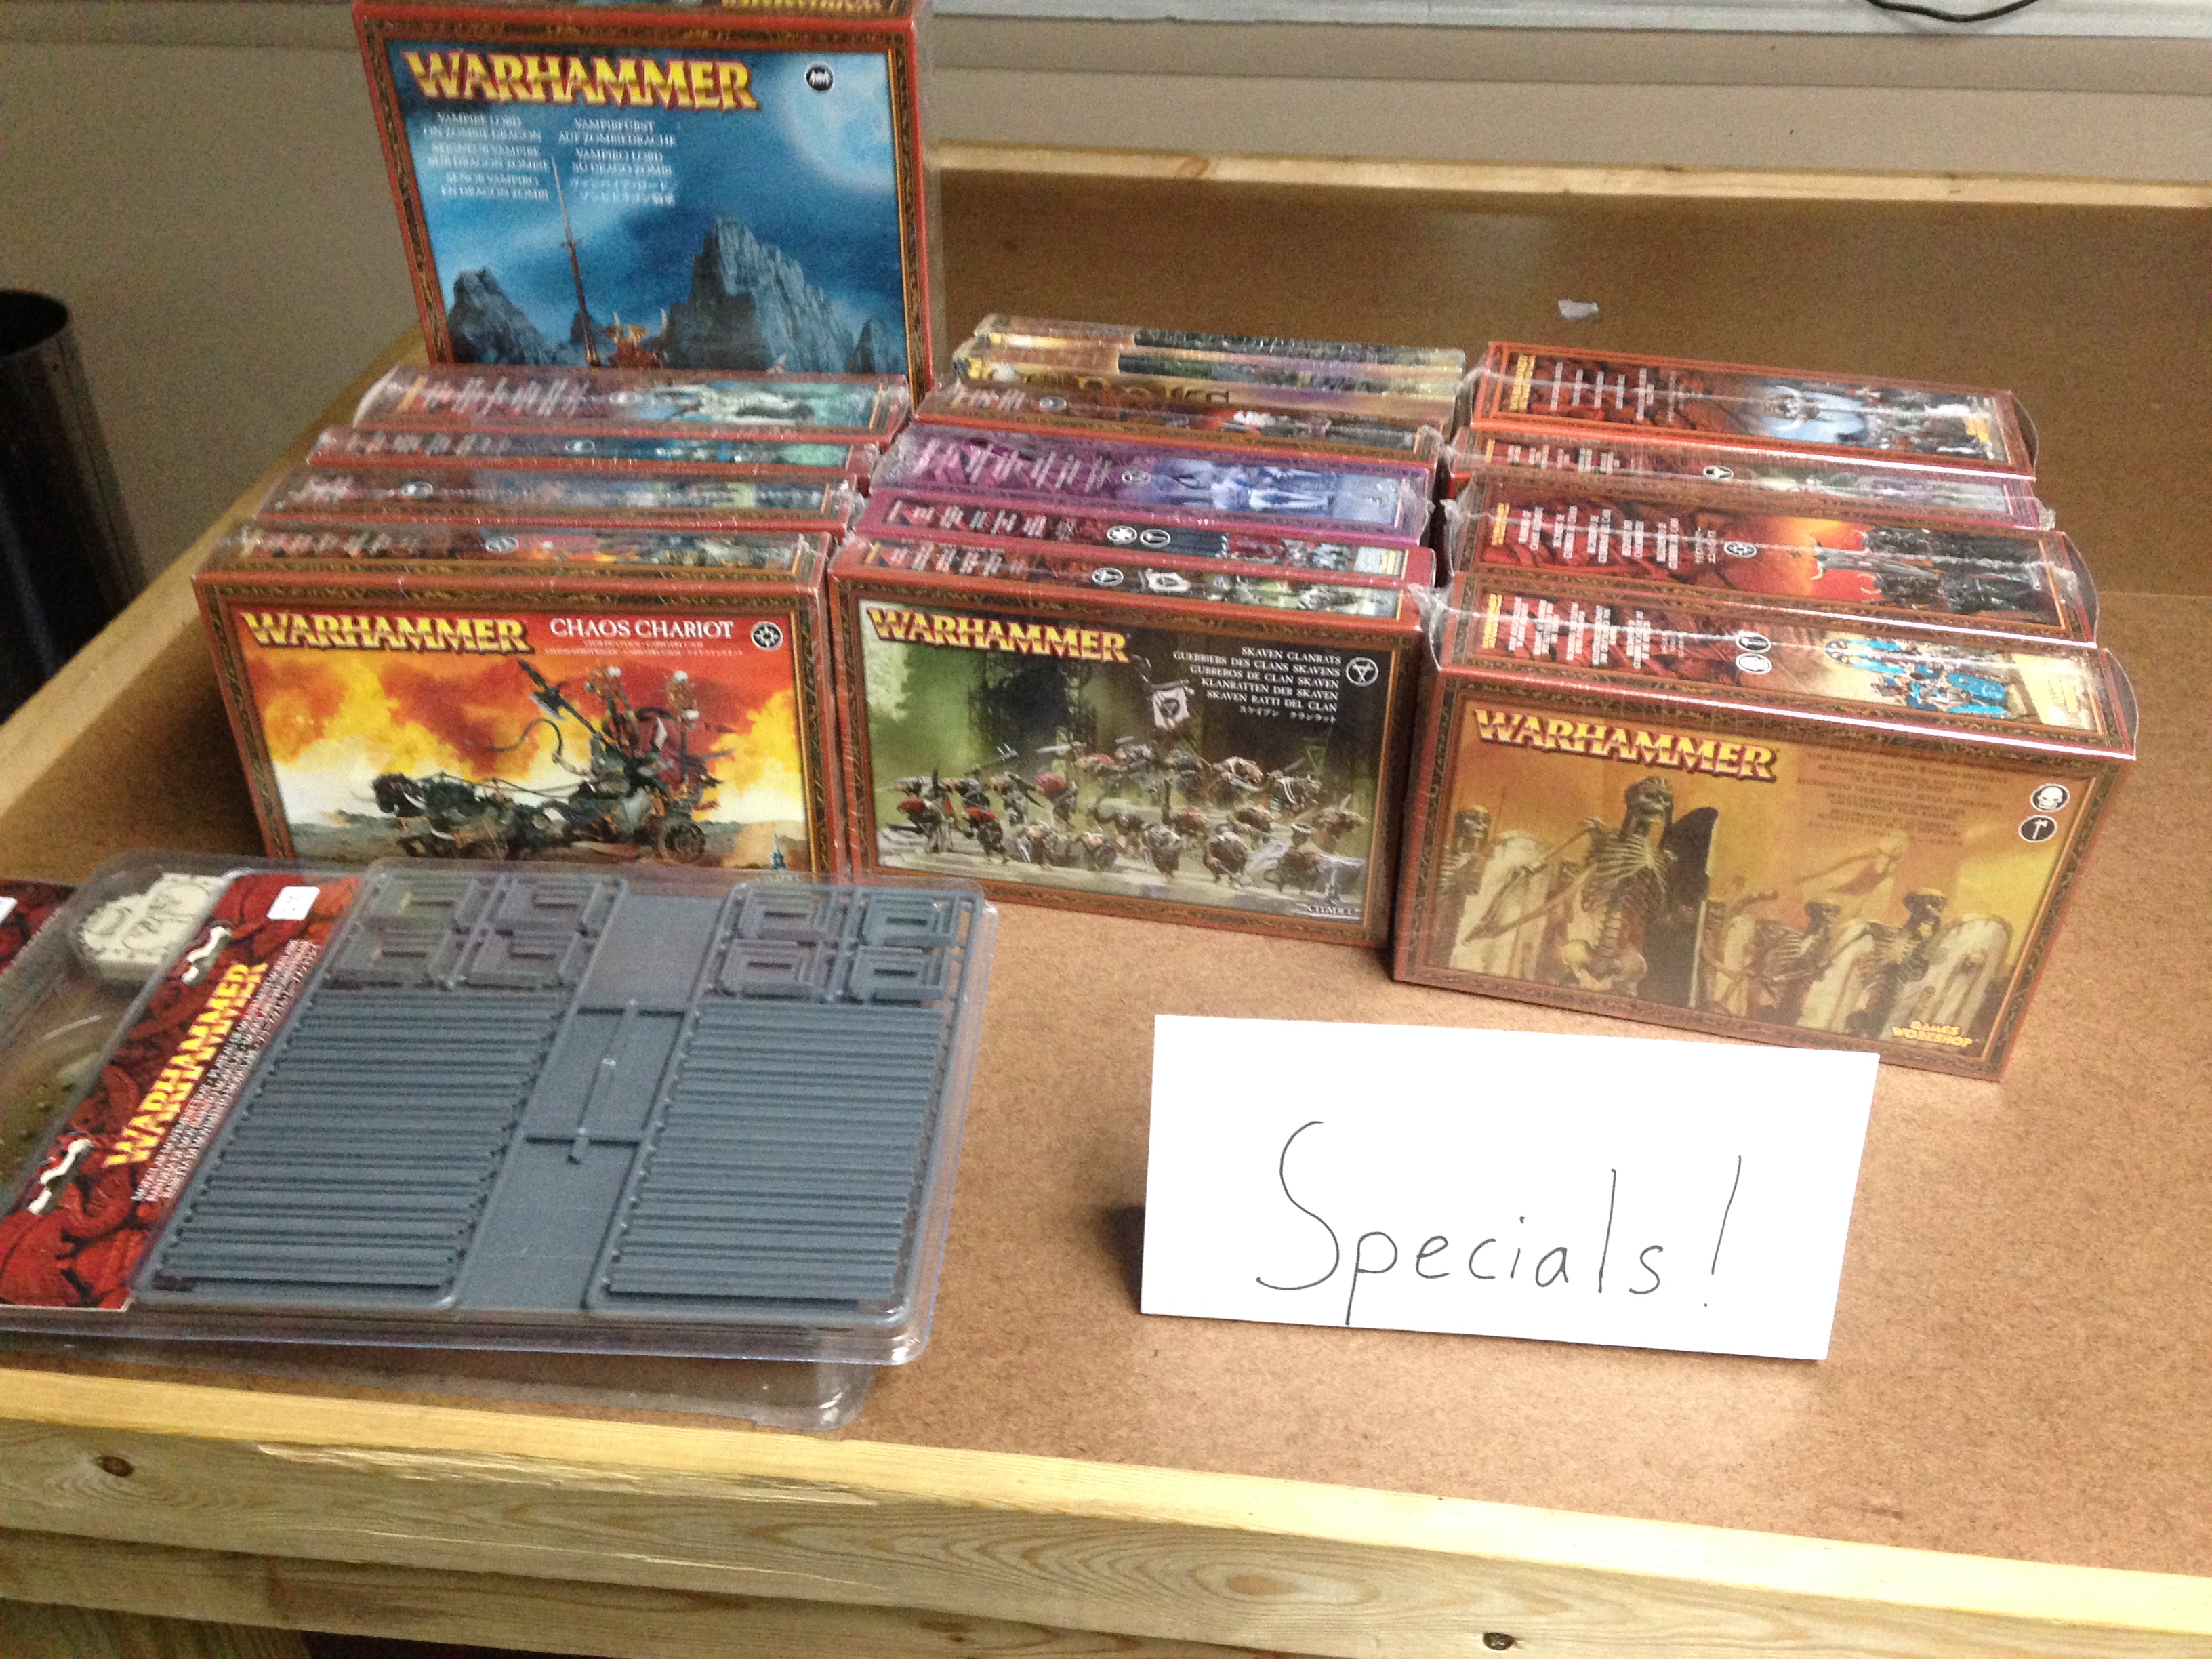 This Week’s Specials! (10/7/15) Warhammer Fantasy 8th Edition Clearance!